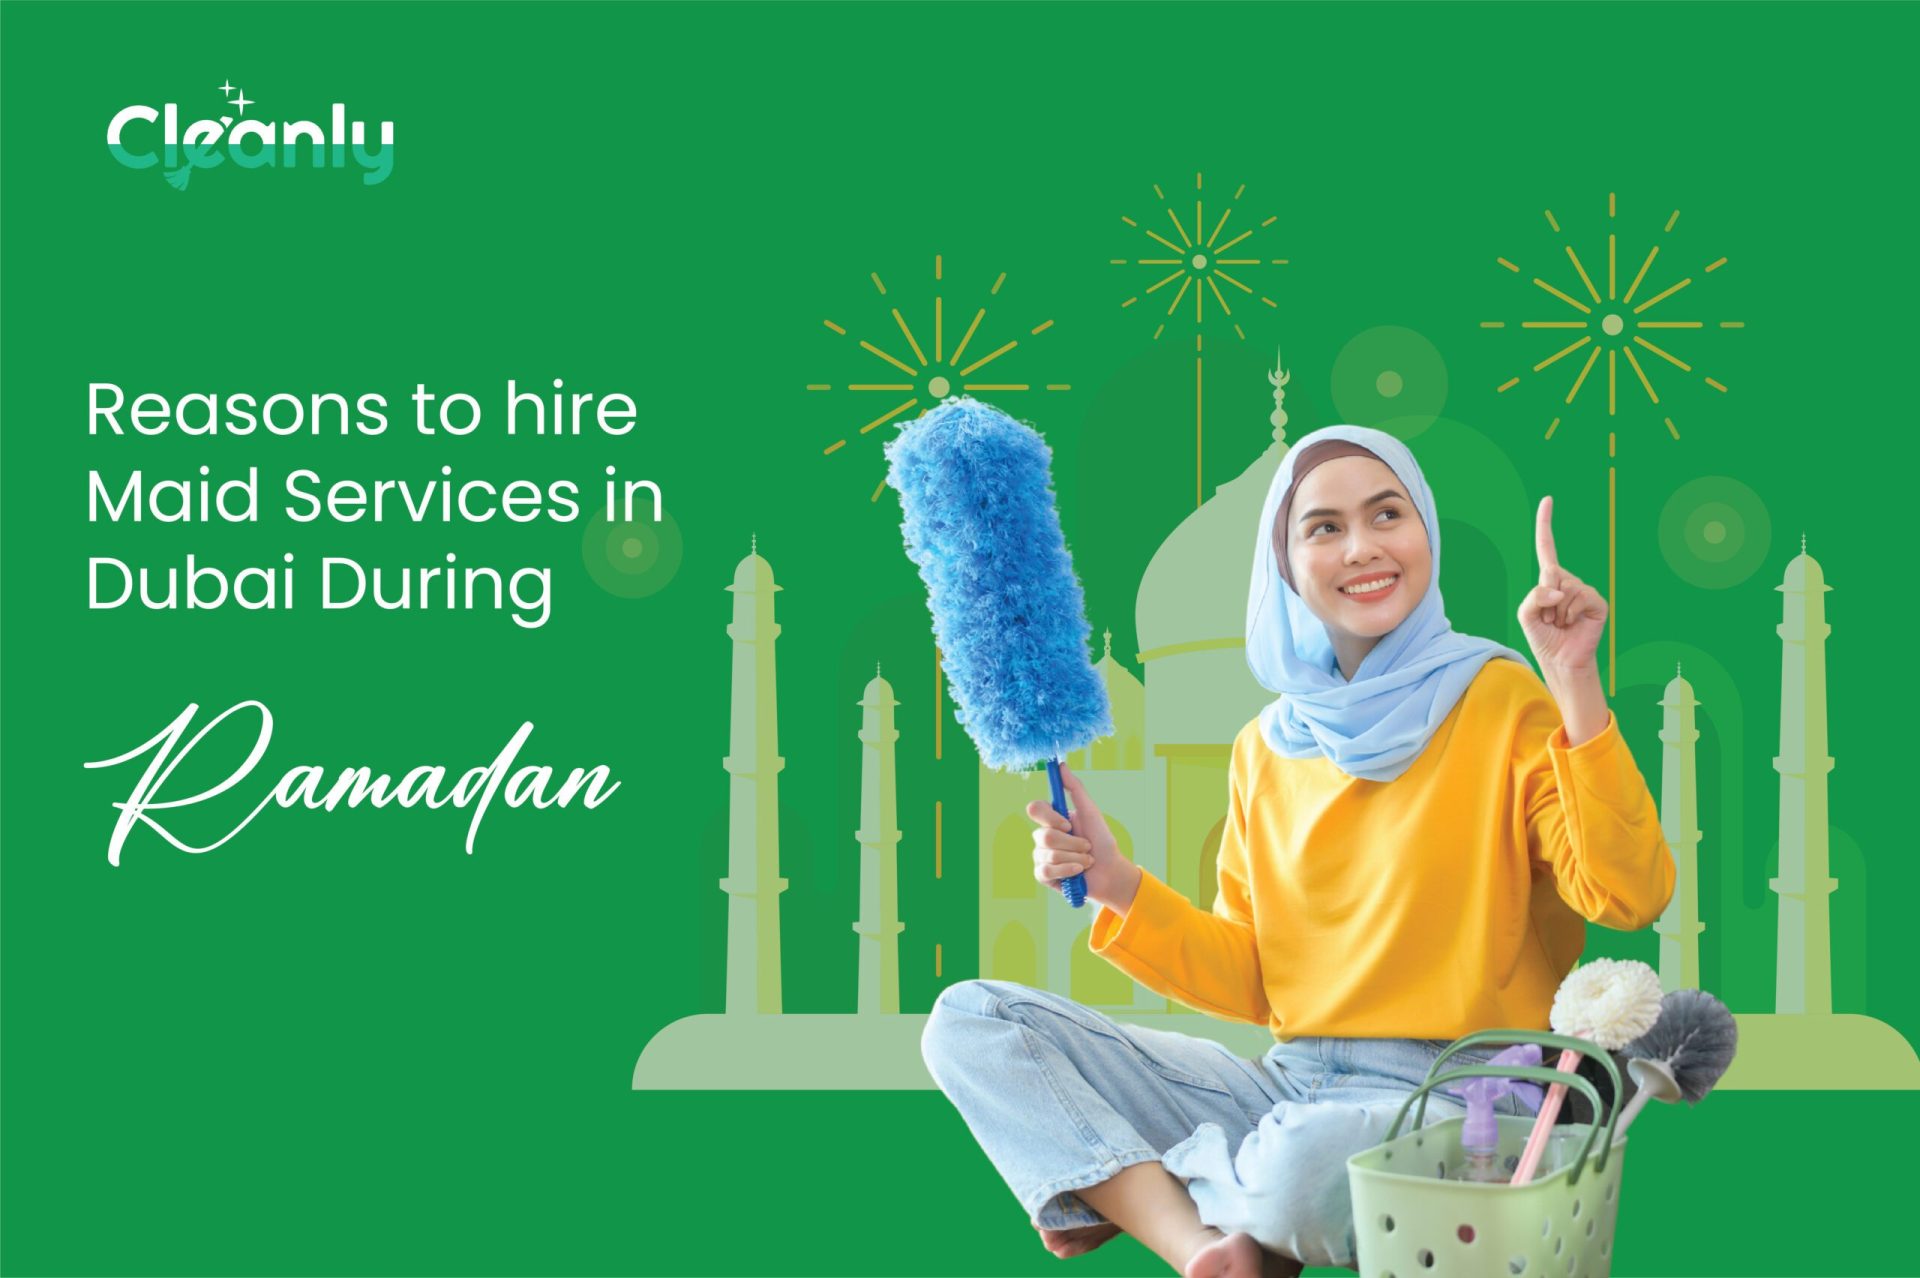 Reasons to hire maid services in Dubai during Ramadan